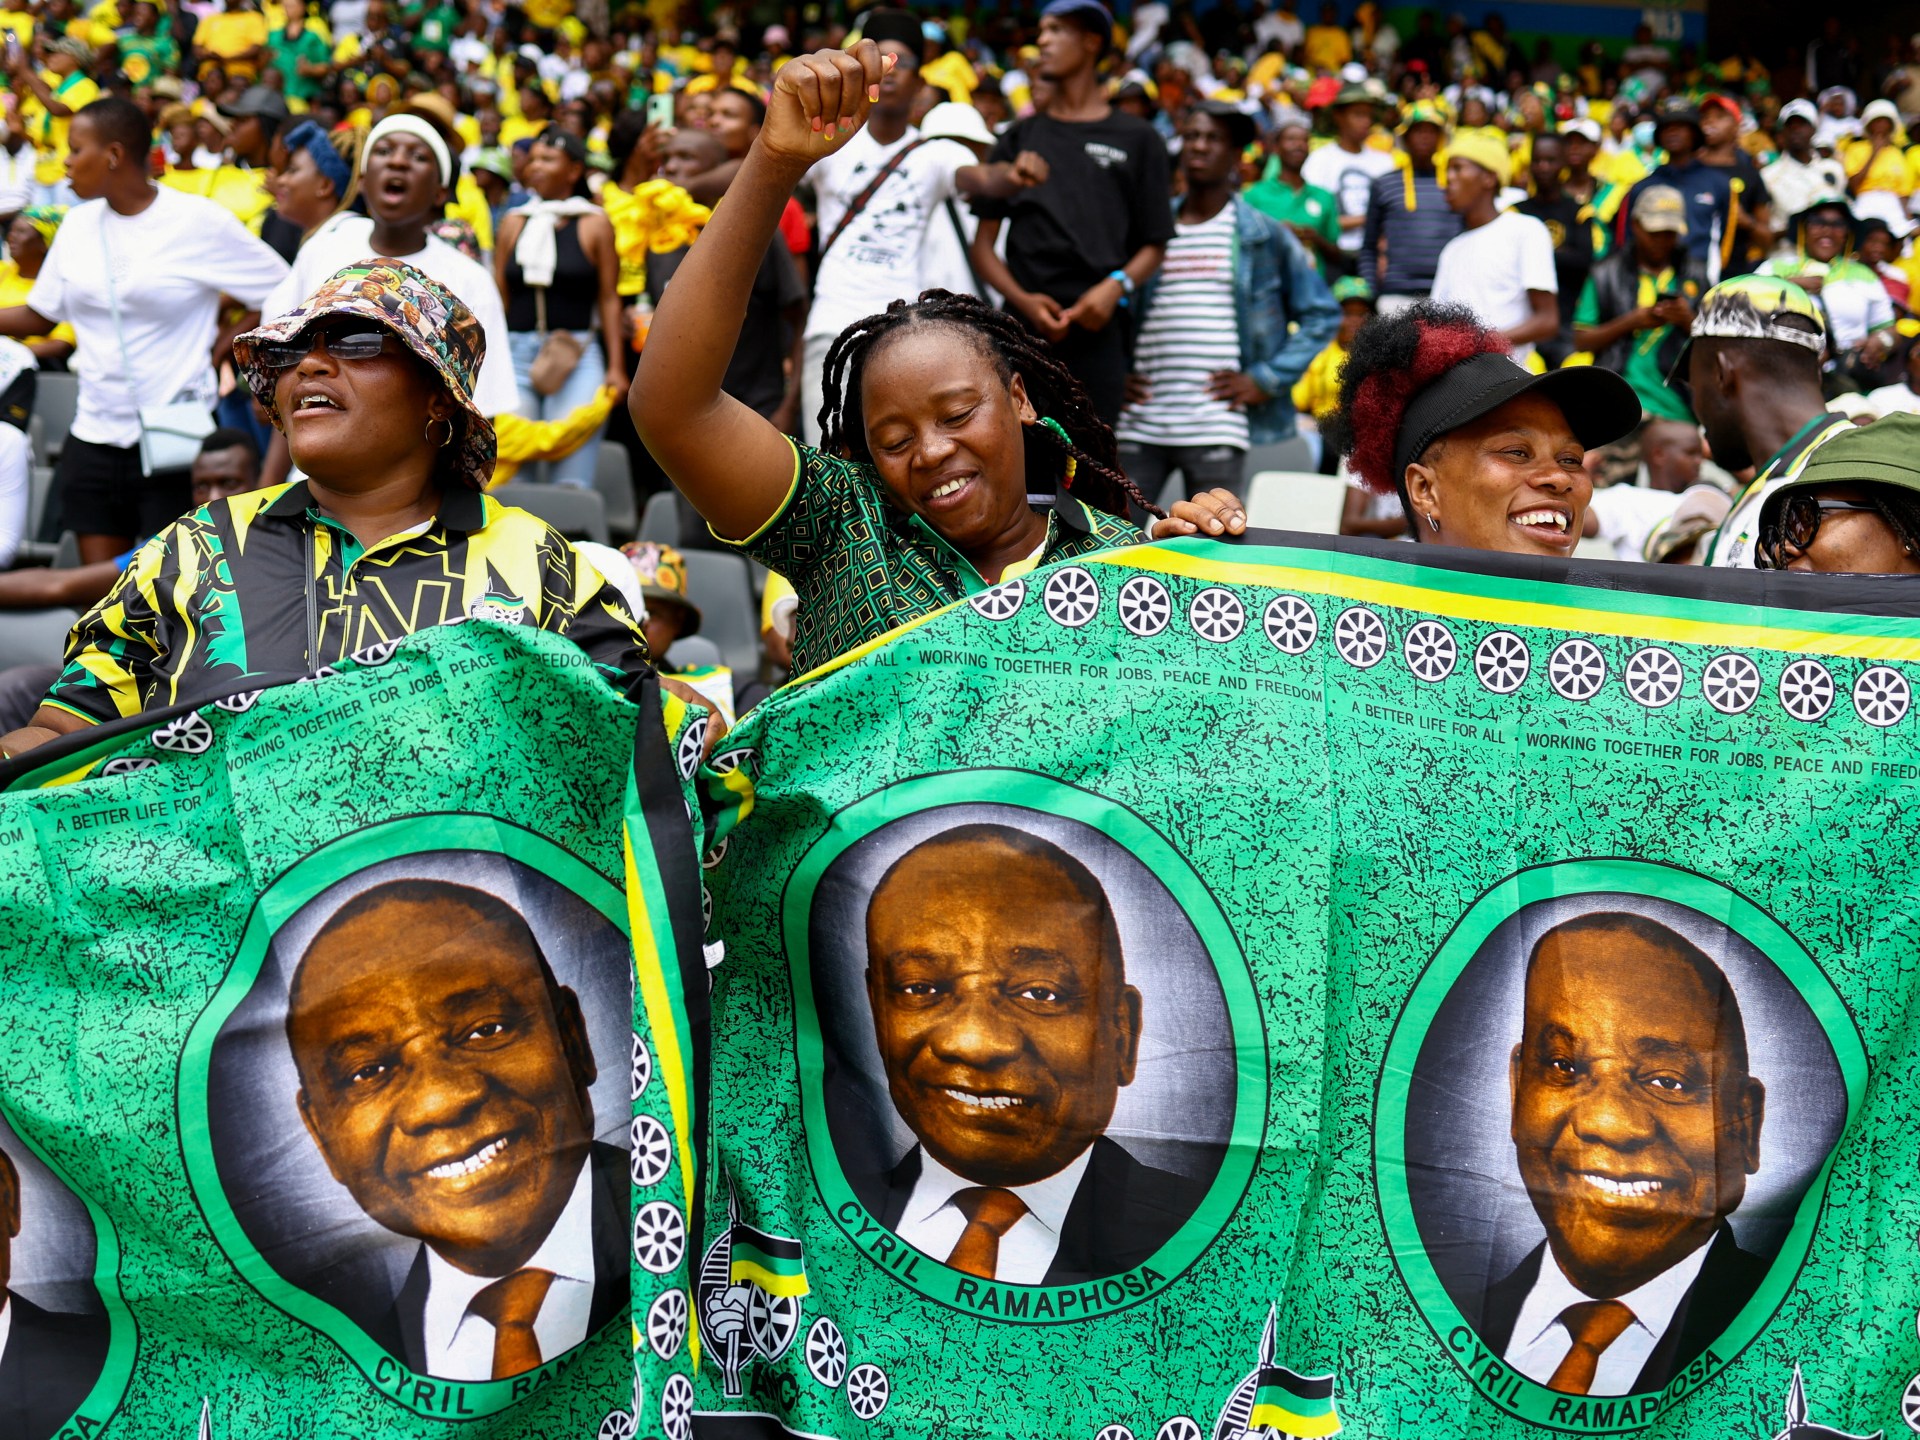 South Africa to hold general election on May 29 | Elections News